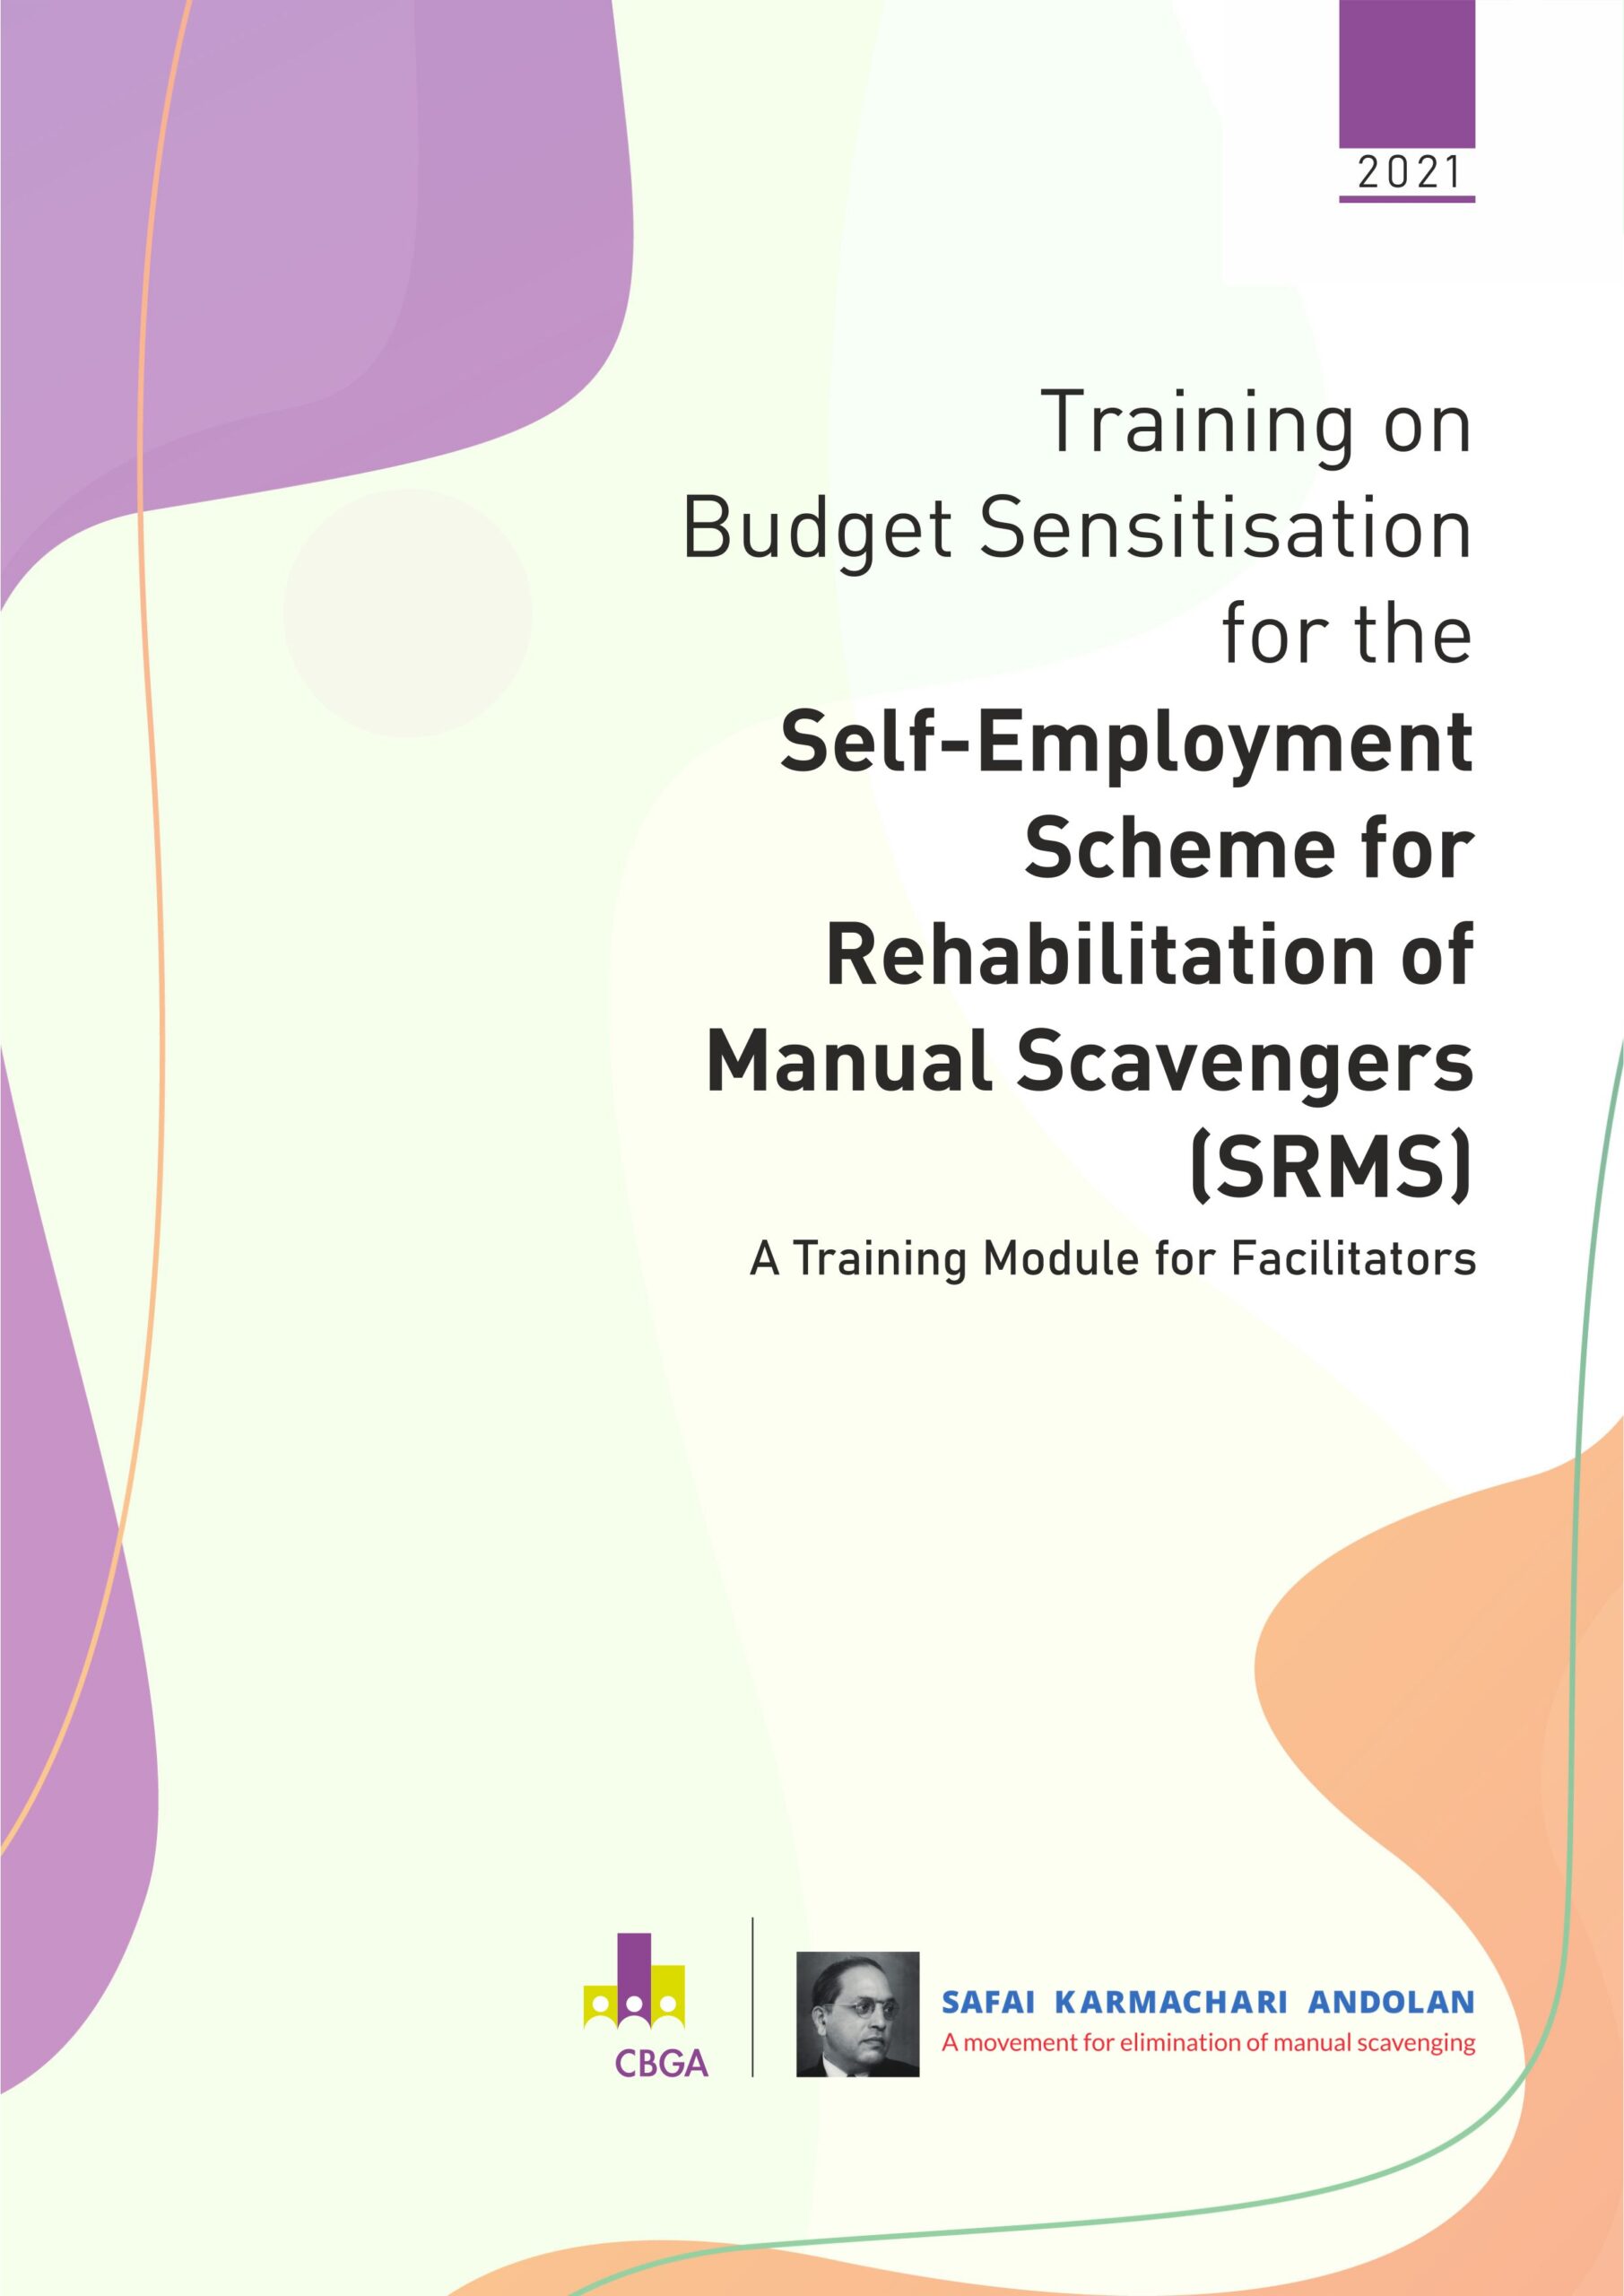 Training on Budget Sensitisation for the SRMS